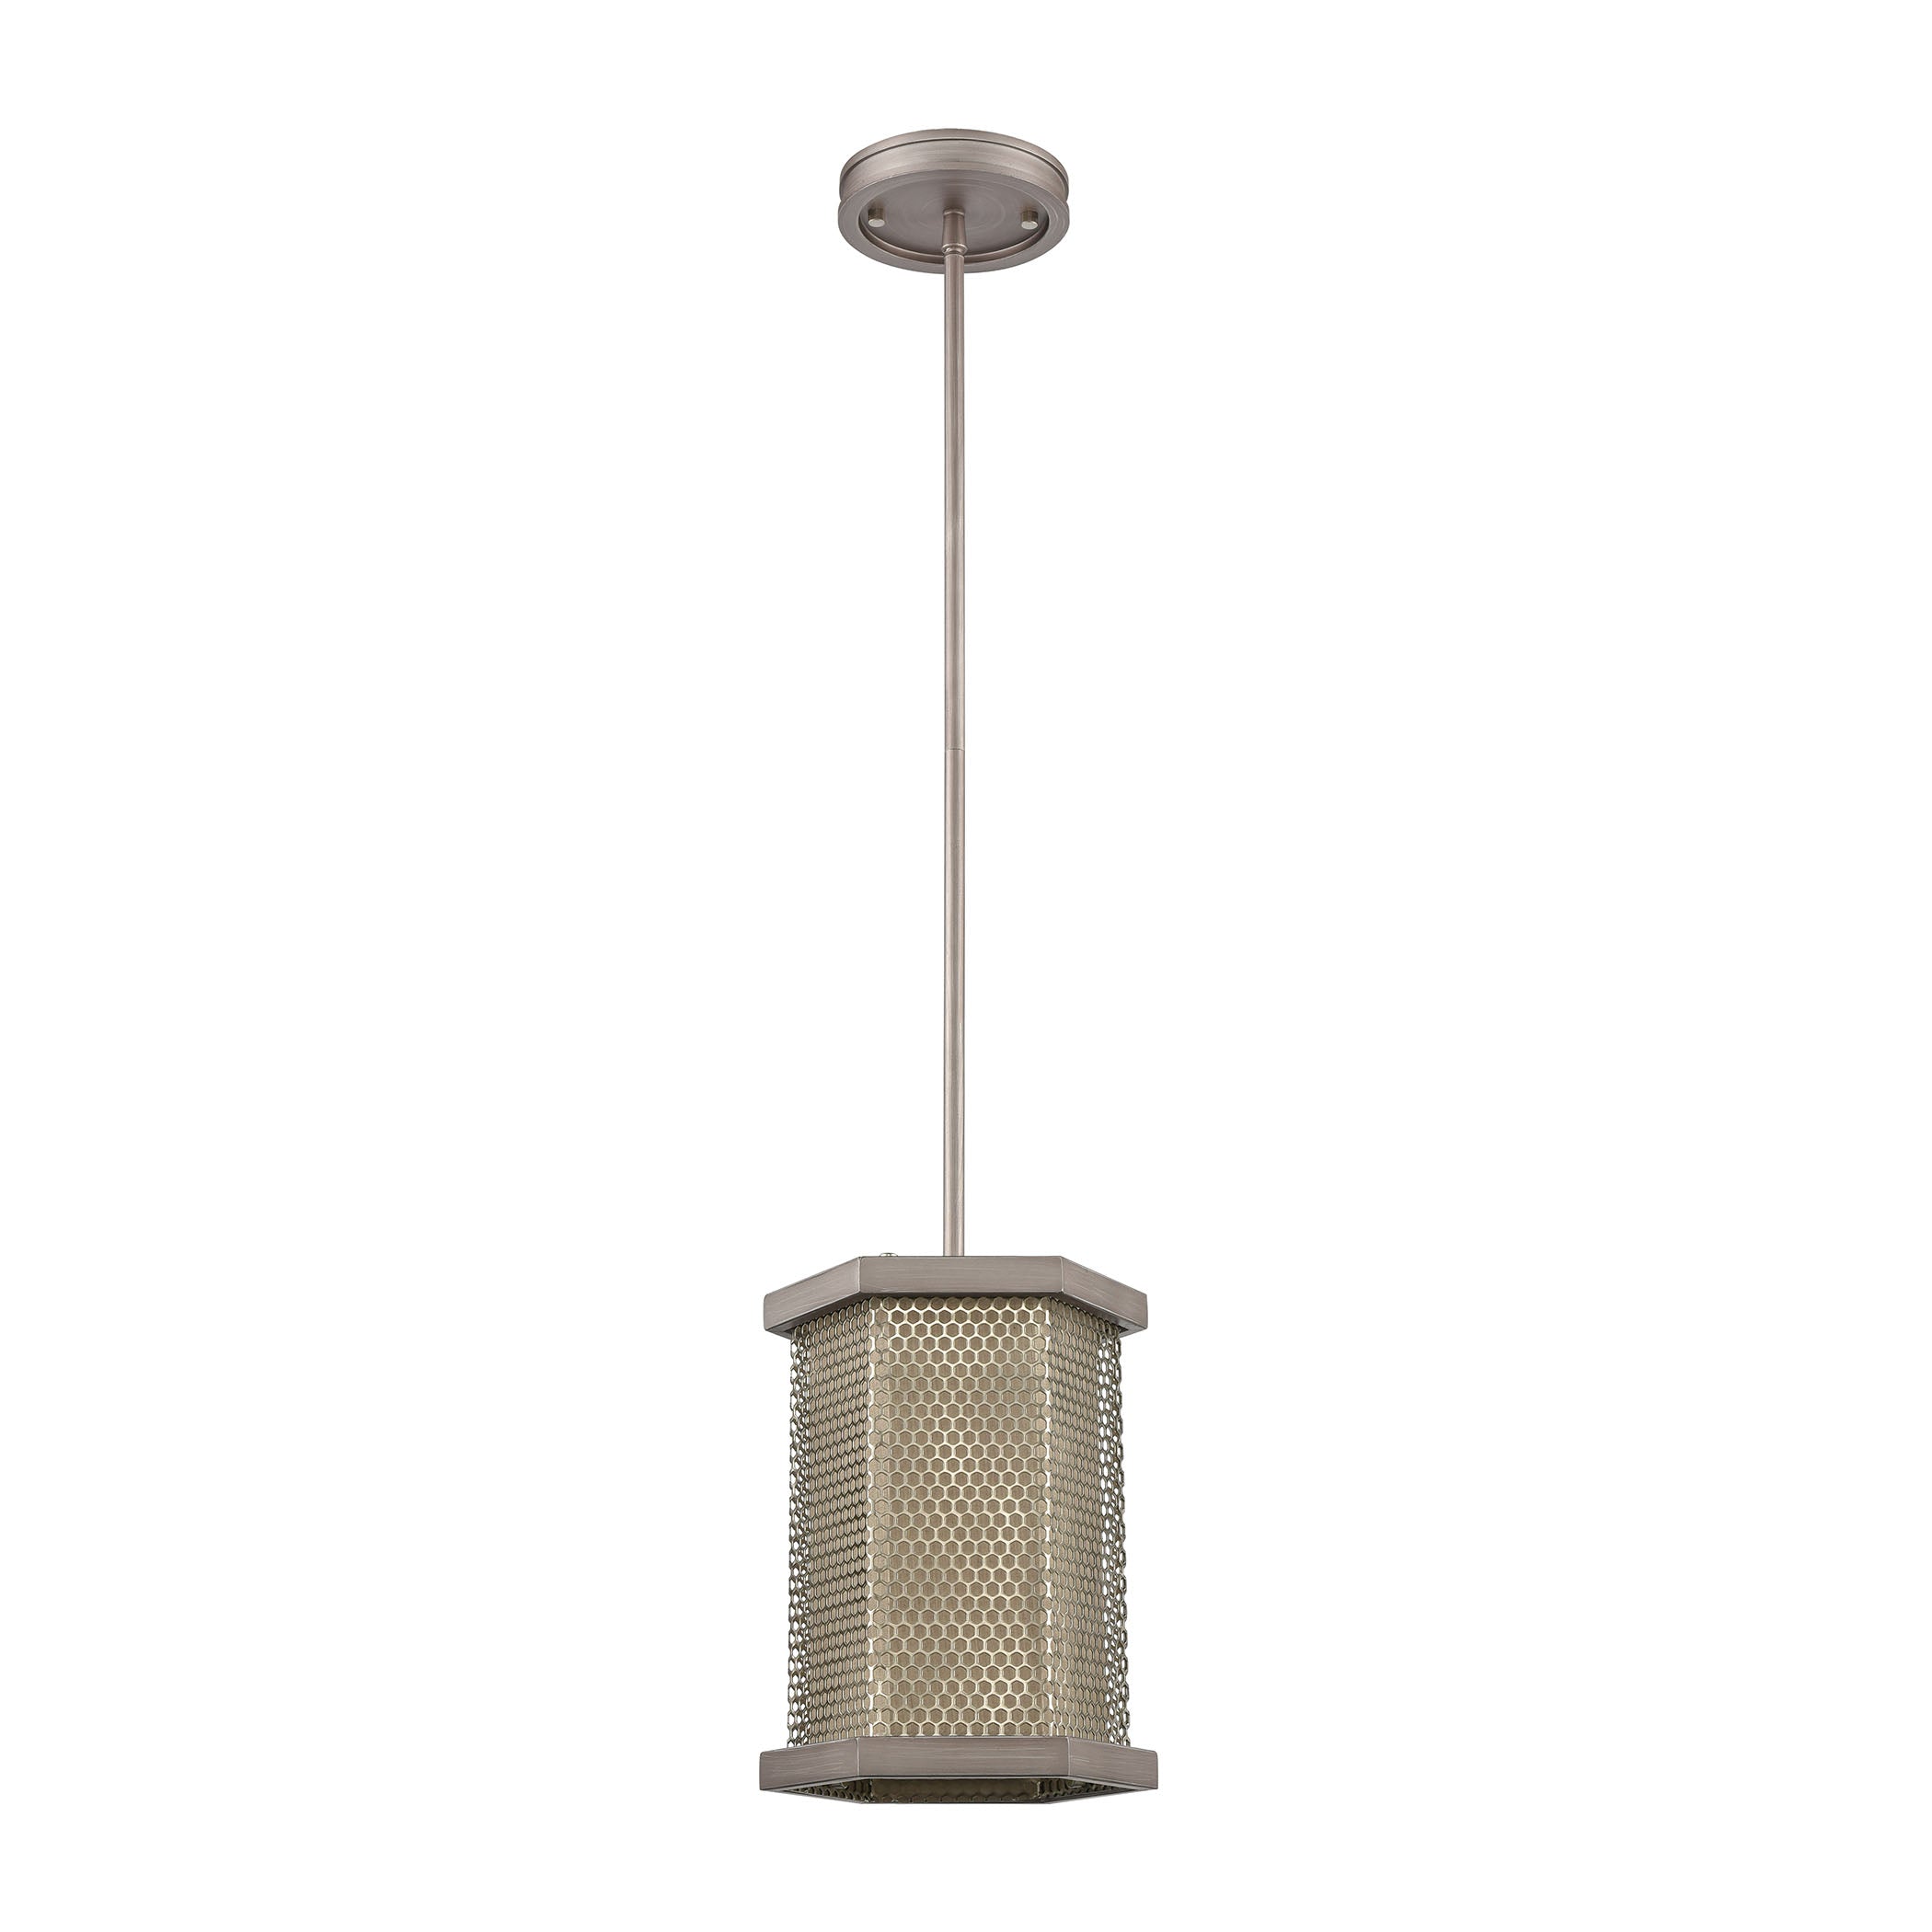 ELK Lighting 15664/1 Crestler 1-Light Mini Pendant in Weathered Zinc and Polished Nickel Mesh with Beige Fabric Shade